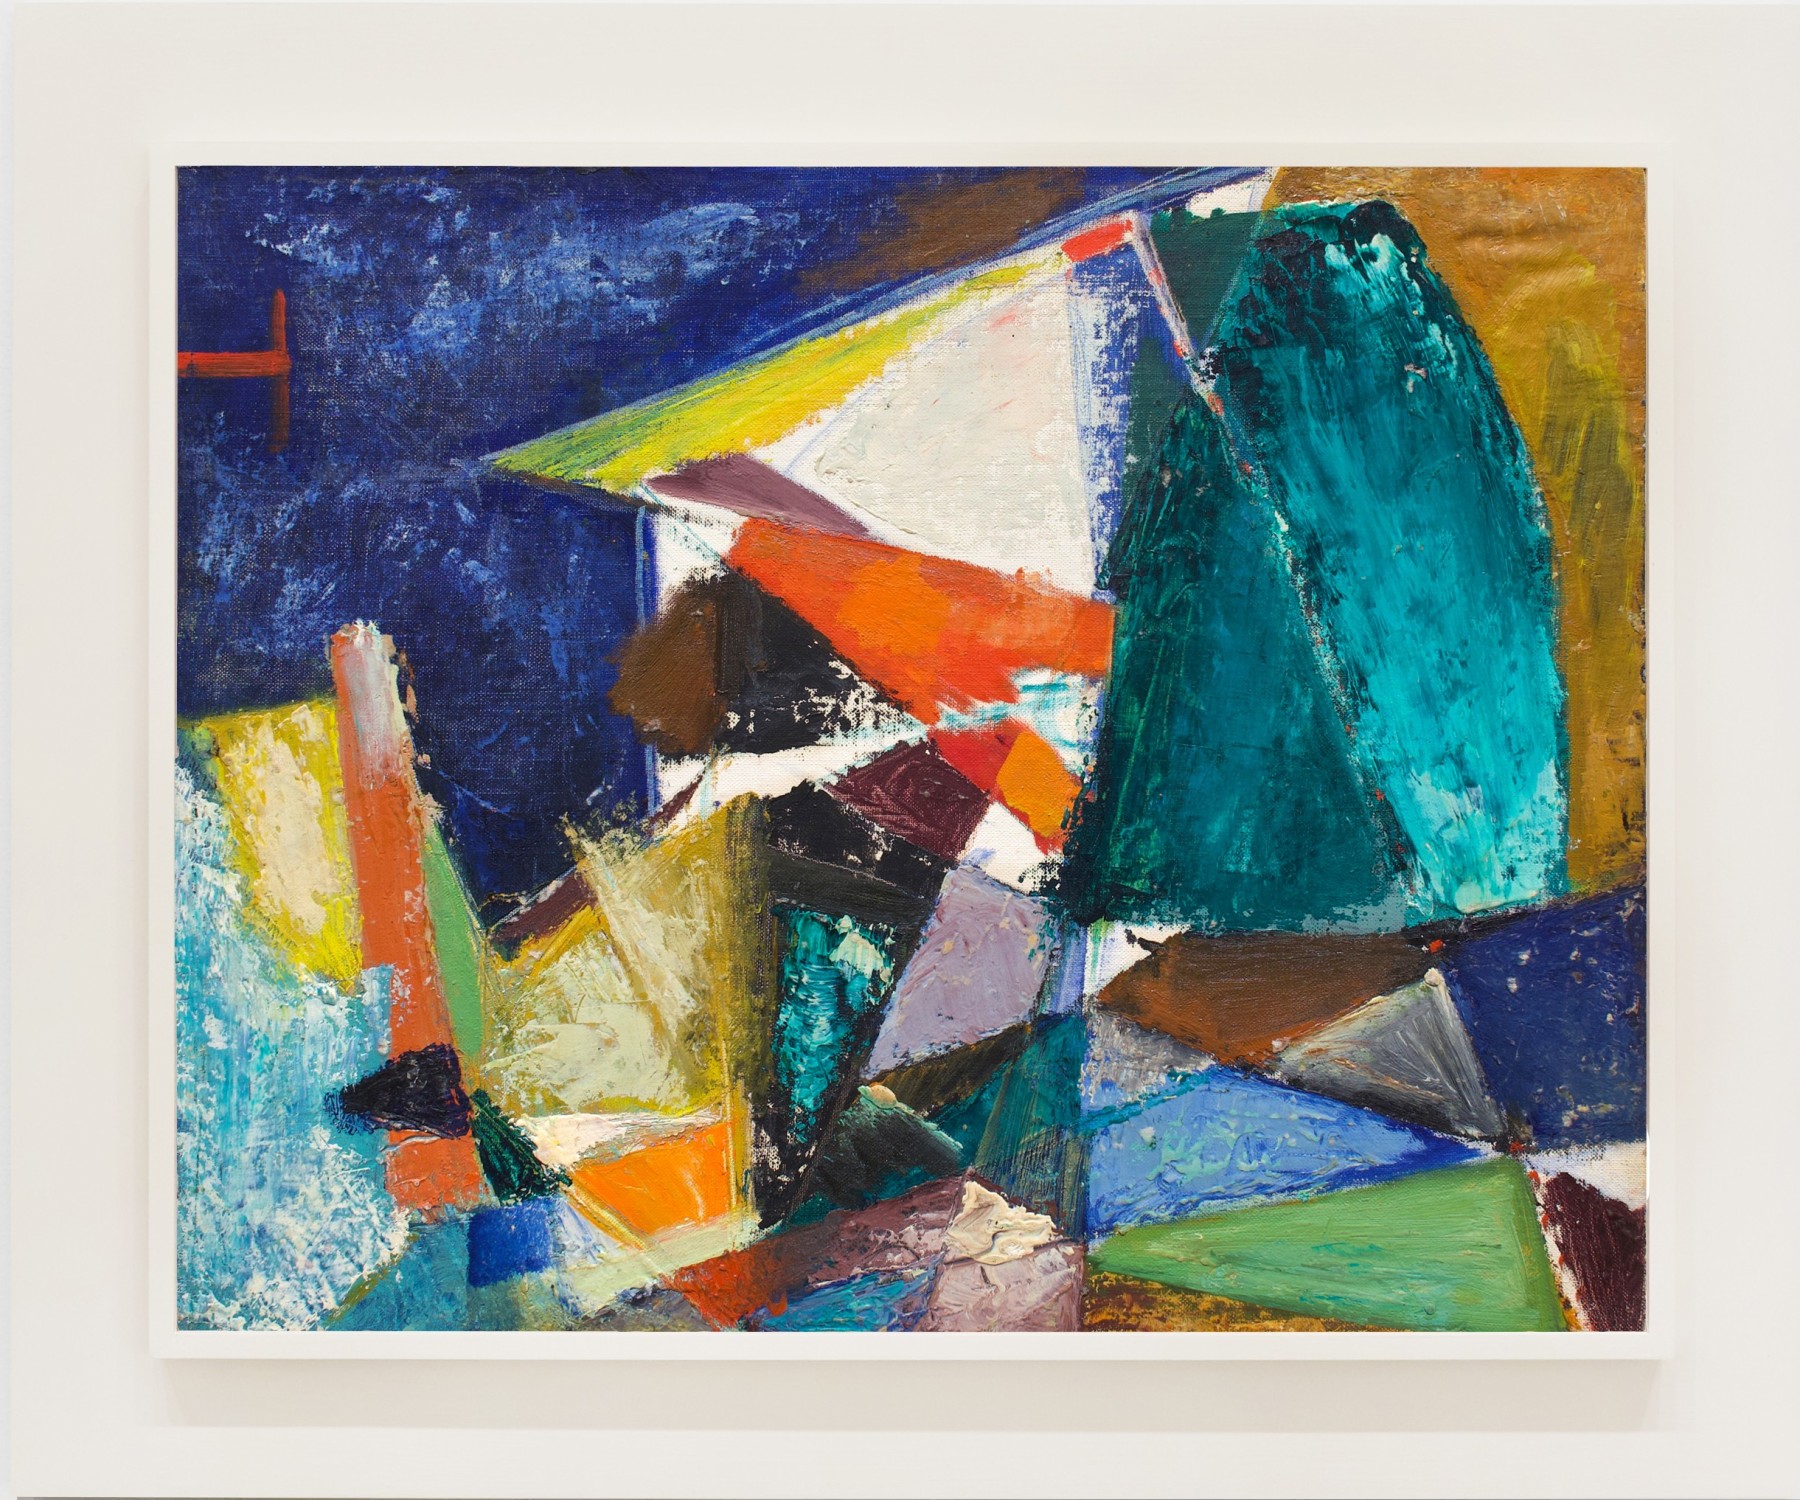 Toni LaSelle: Abstraction Grounded in the Physical World - Features - Independent Art Fair